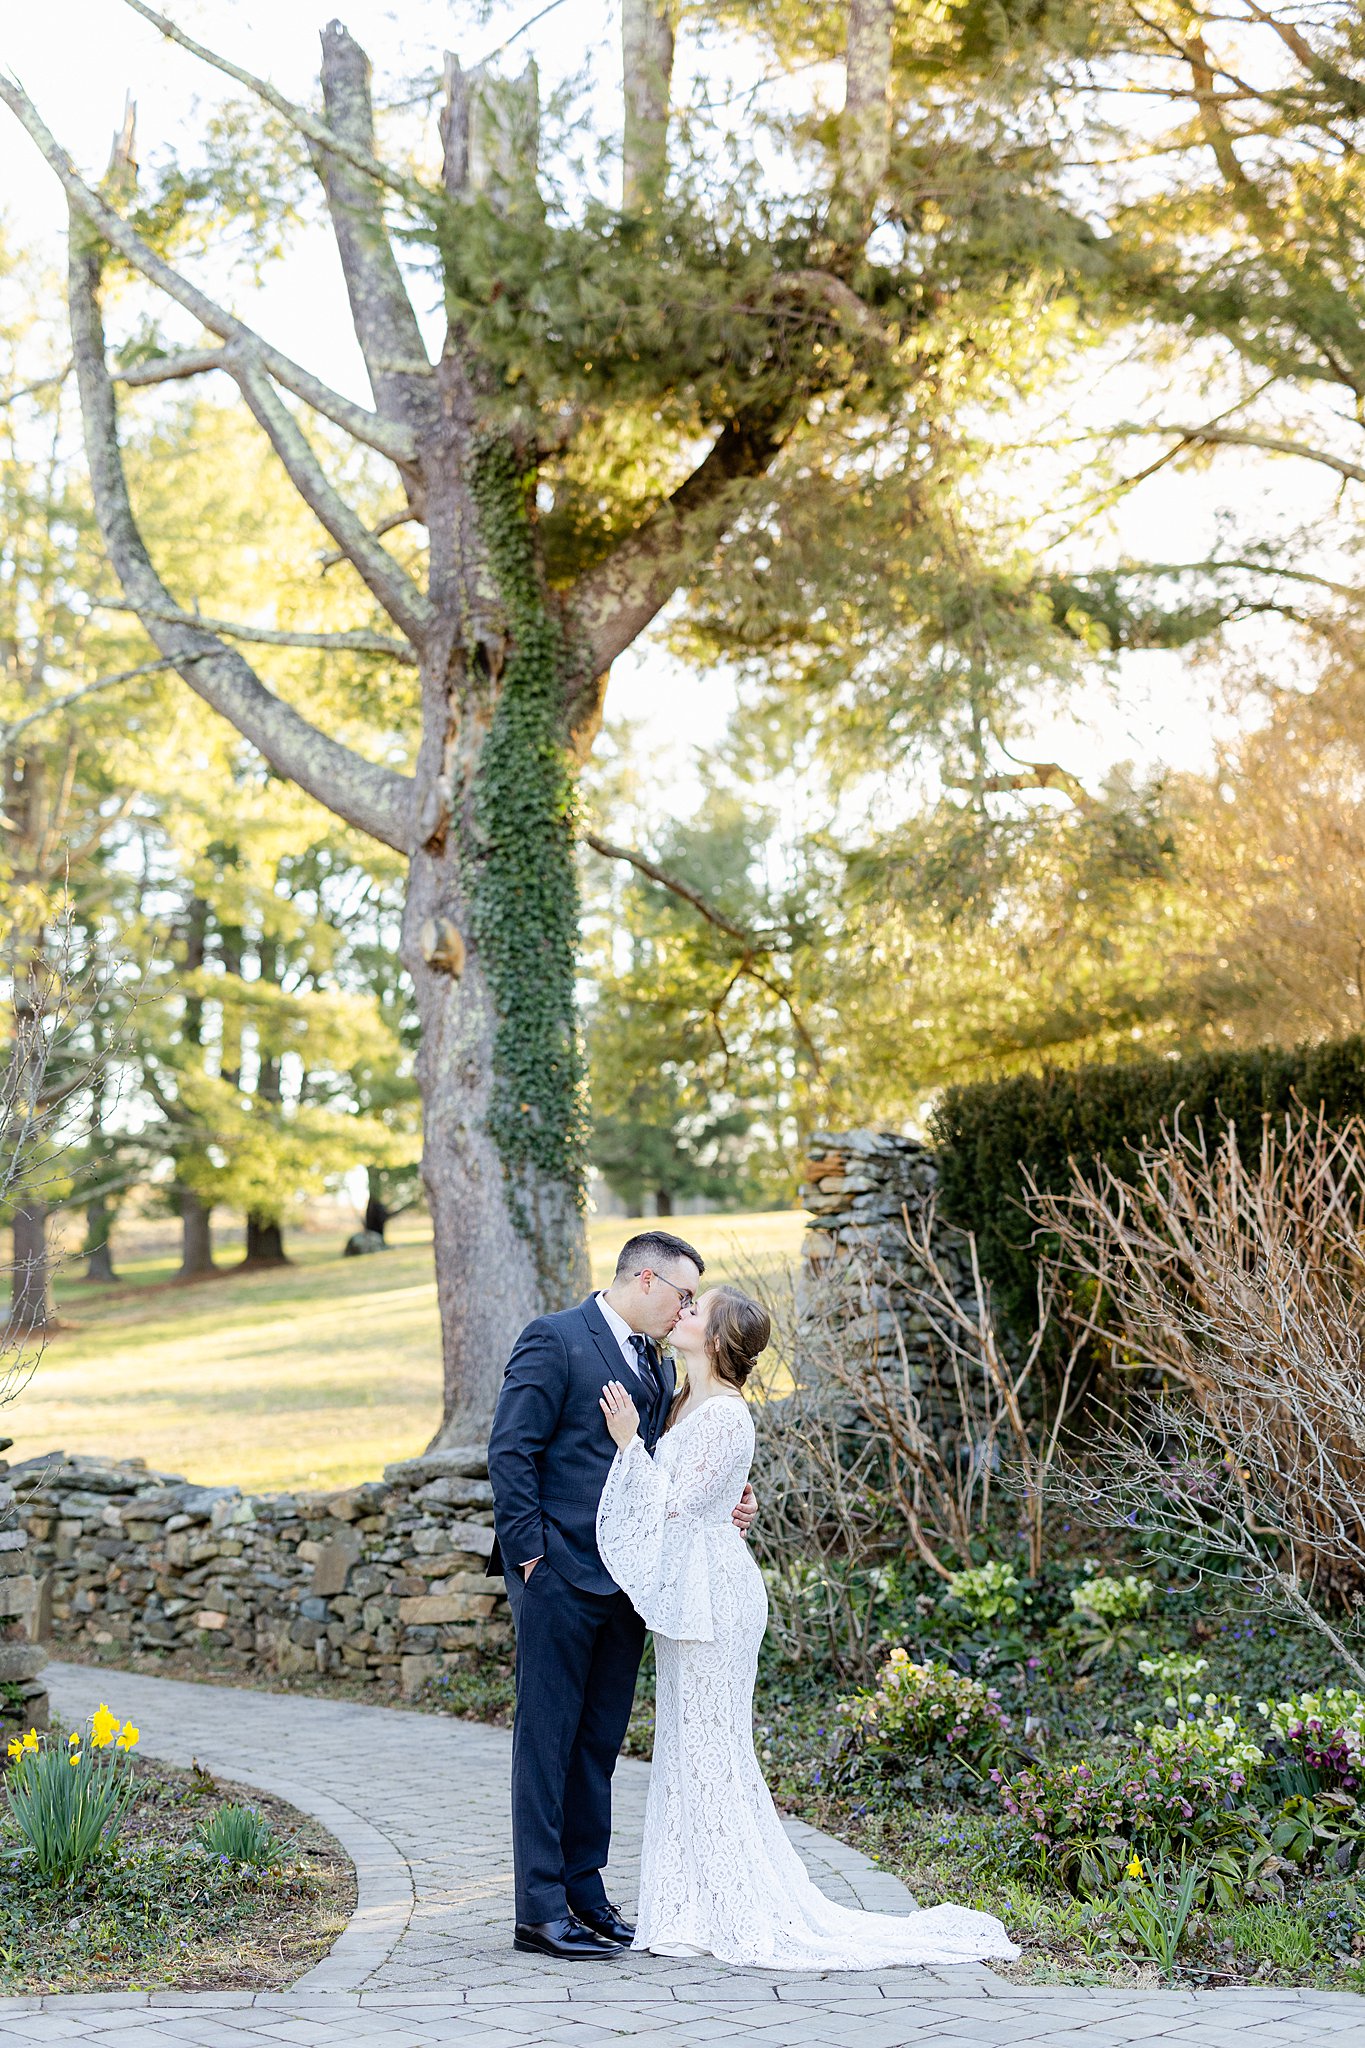 Newlyweds kiss in a stone path of a groomed garden virginia elopement